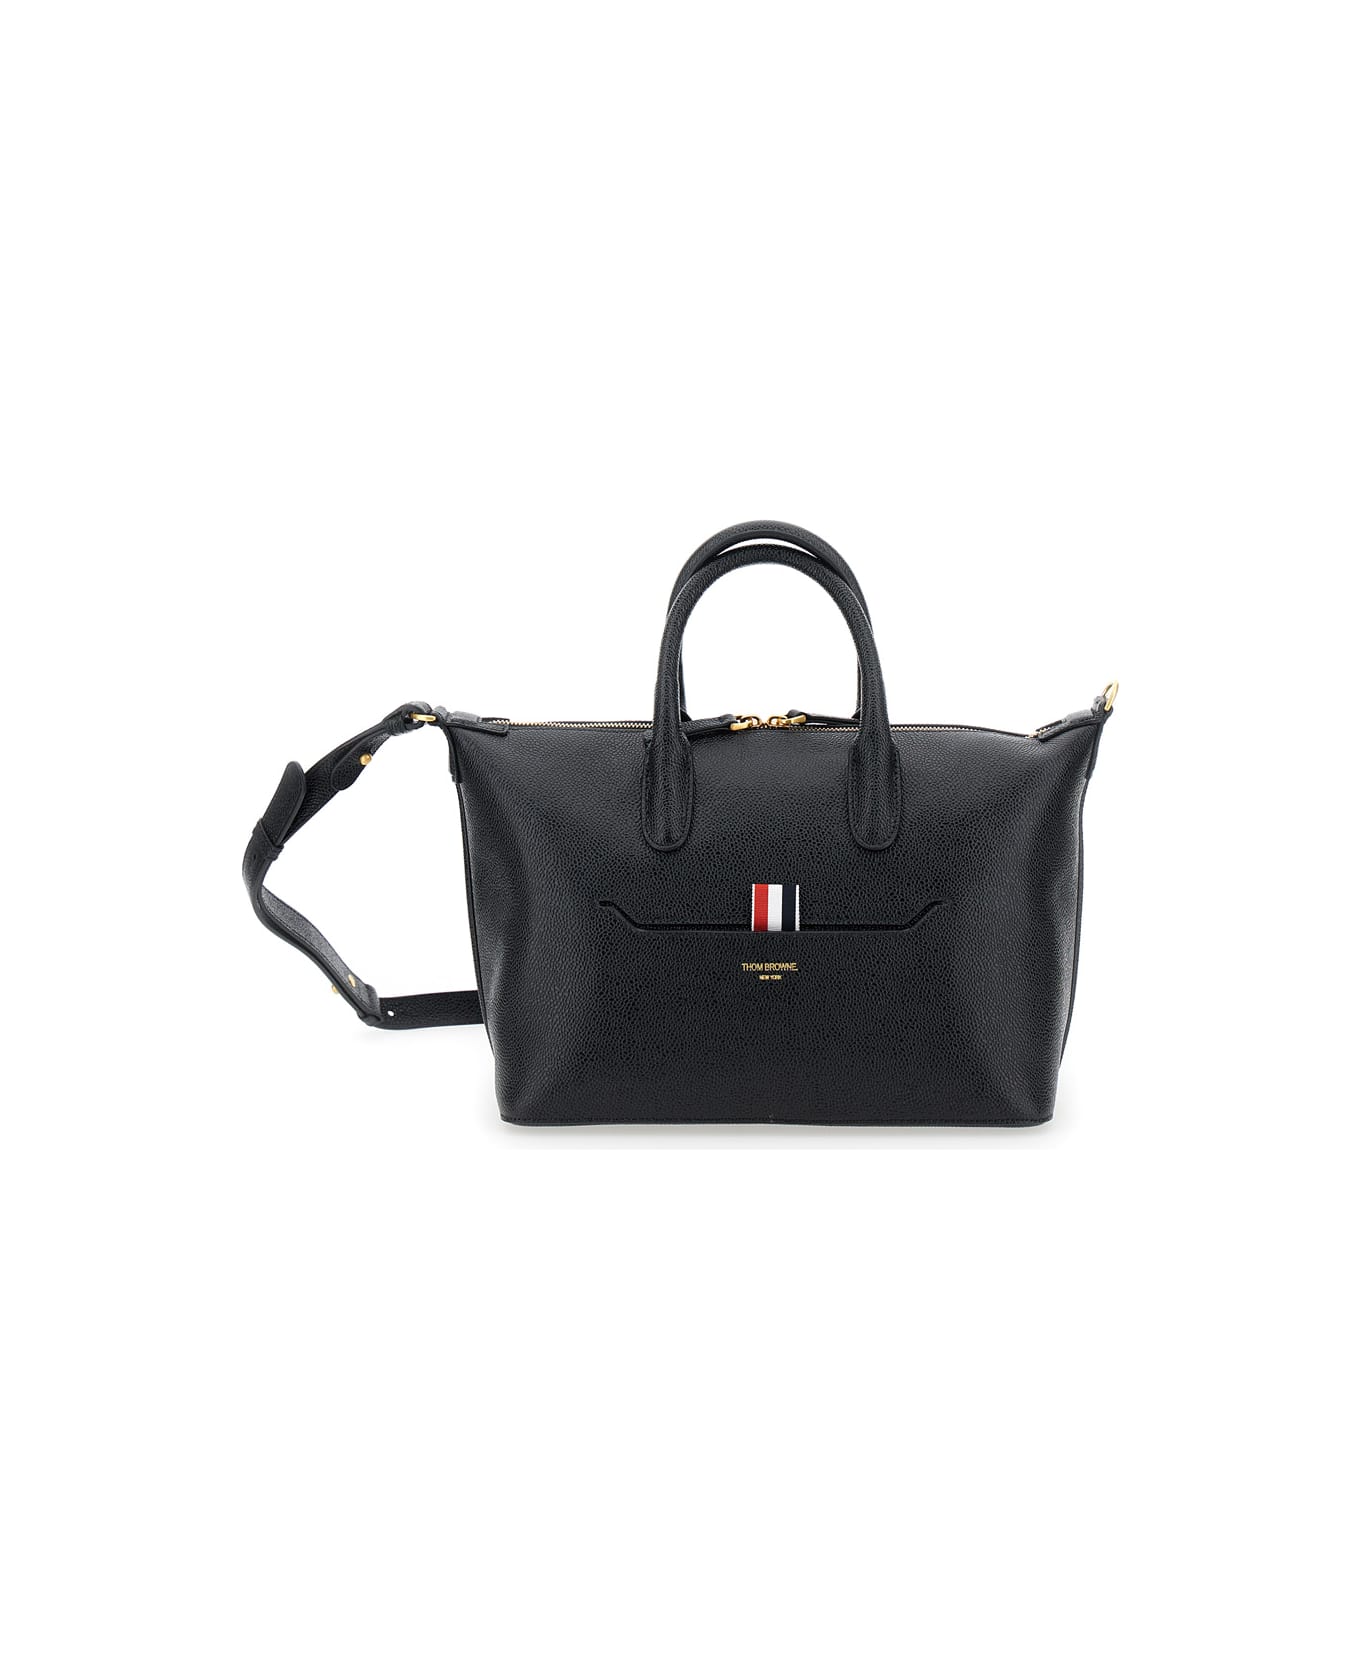 Thom Browne Small Soft Duffle W/ Shoulder Strap In Pebble Grain Leather - Black